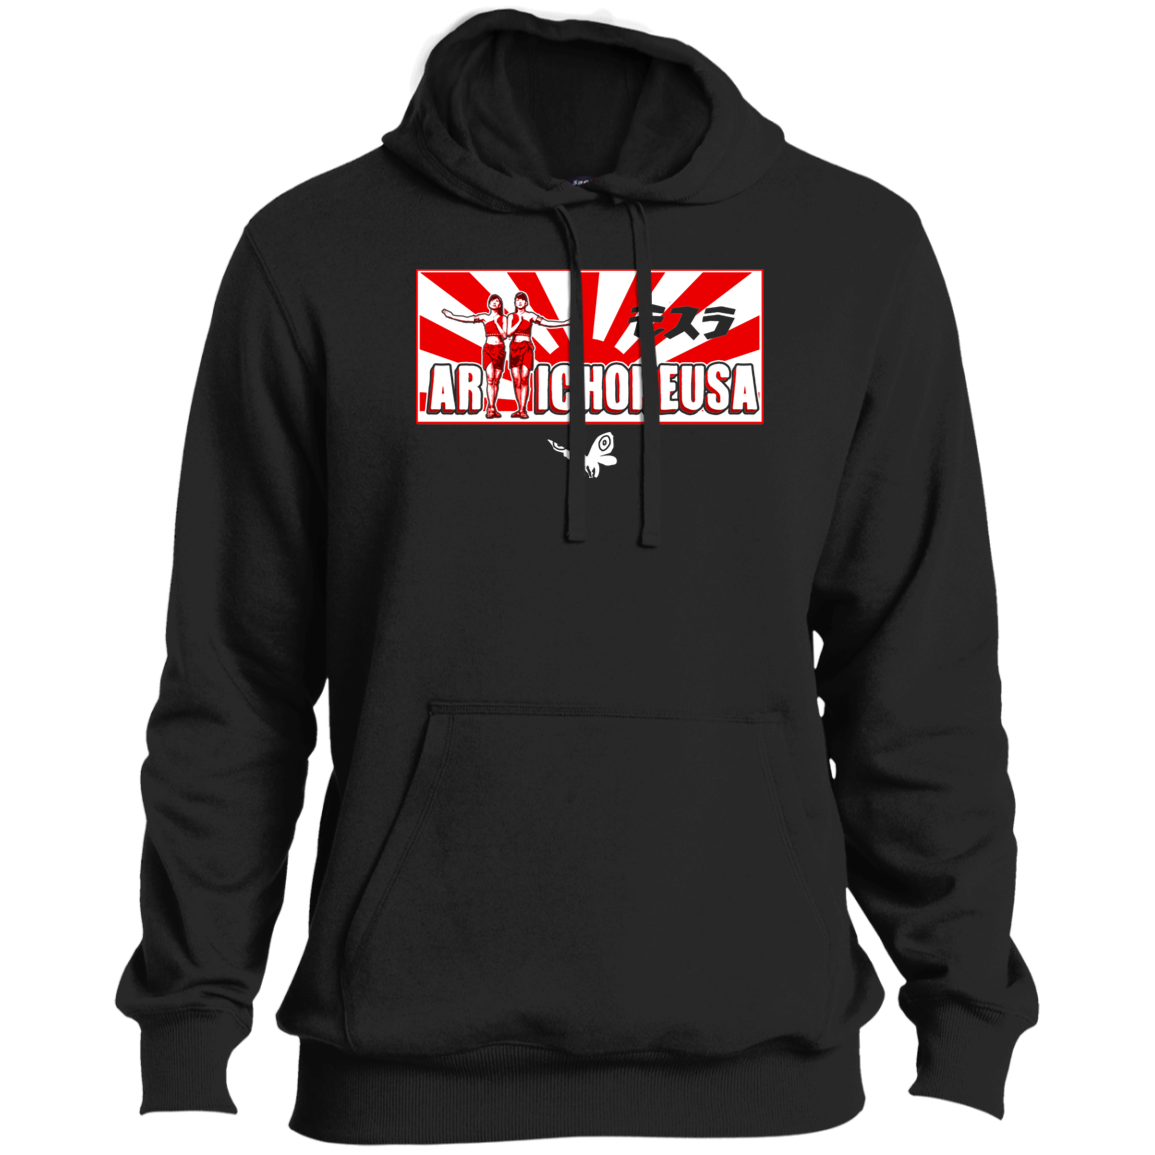 ArtichokeUSA Character and Font design. Shobijin (Twins)/Mothra Fan Art . Let's Create Your Own Design Today. Soft Pullover Hoodie